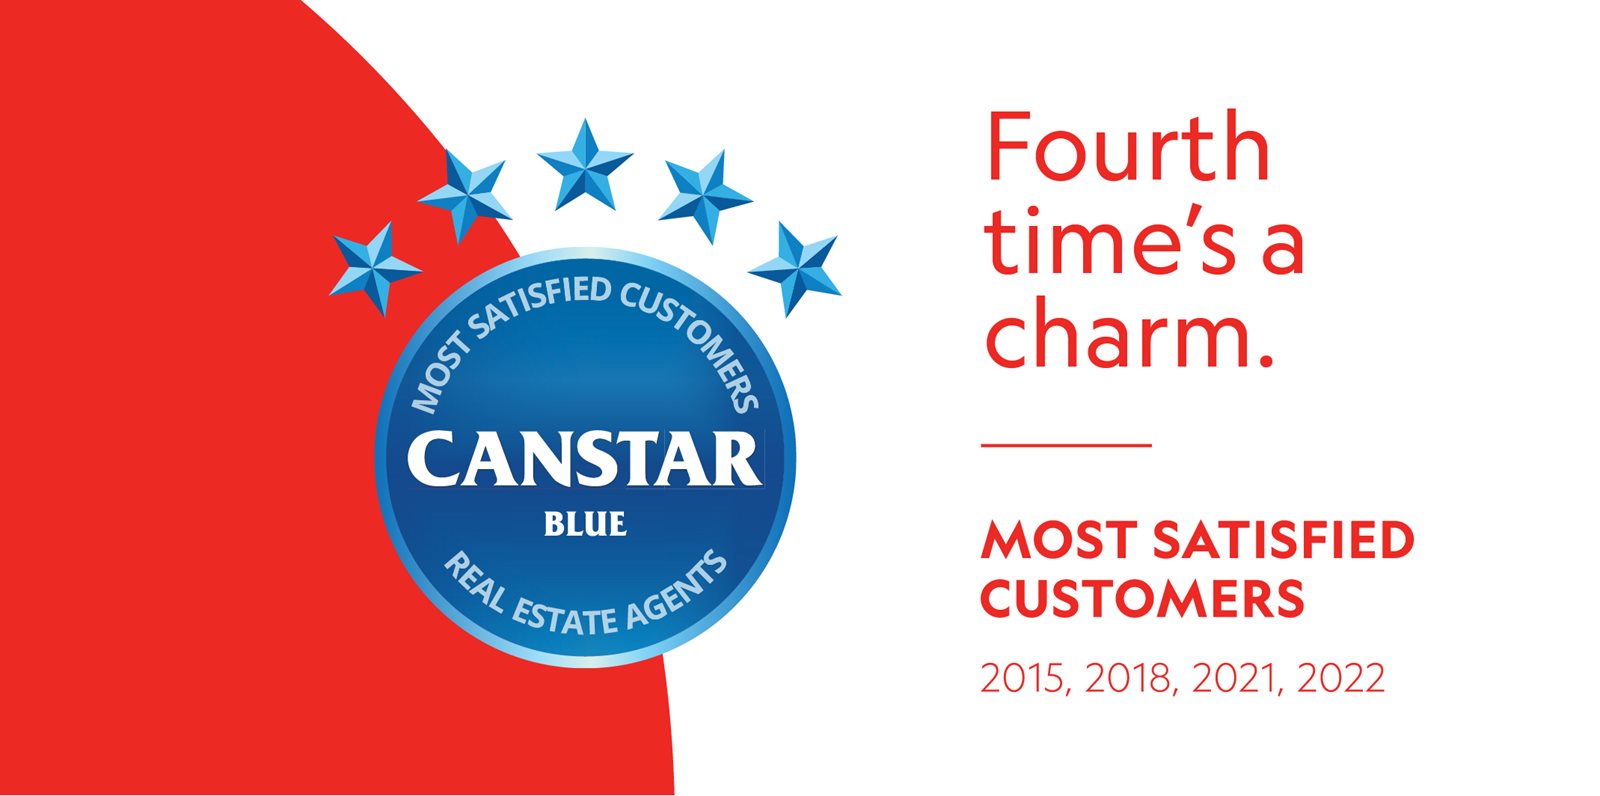 Most Satisfied Customers? YIP! 